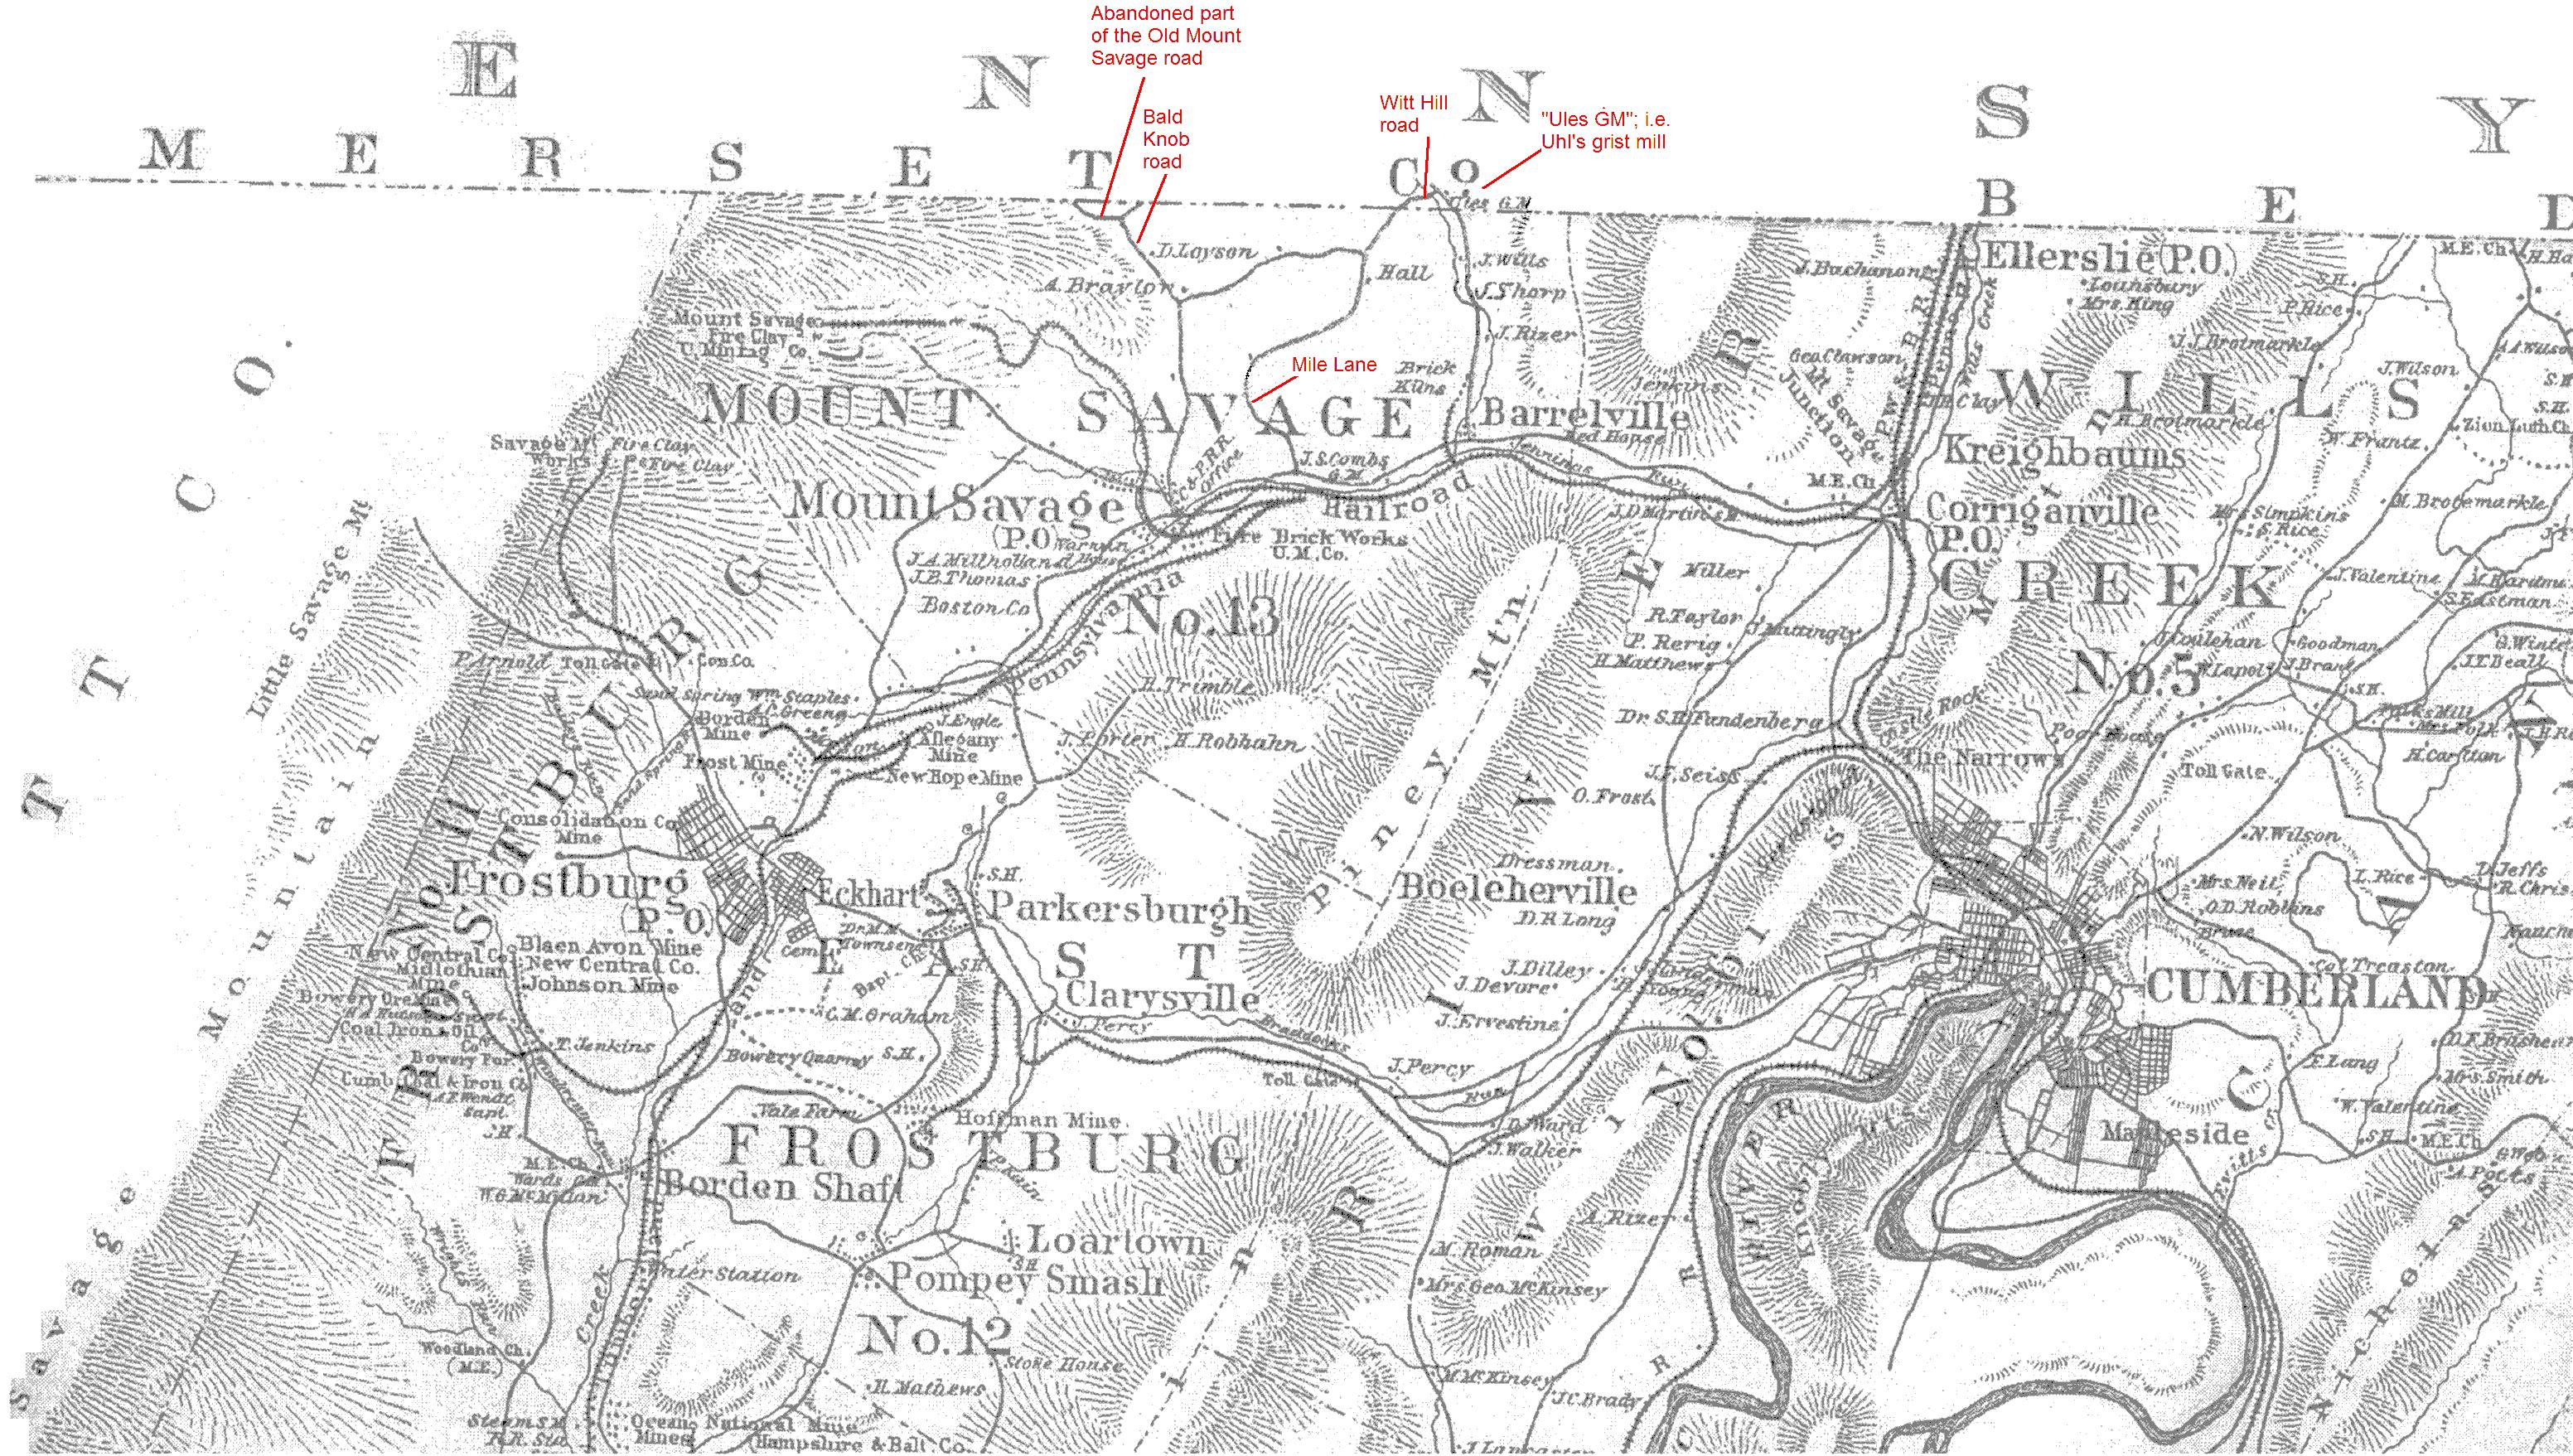 An excerpt from the 1875 map of Allegany County, Maryland.